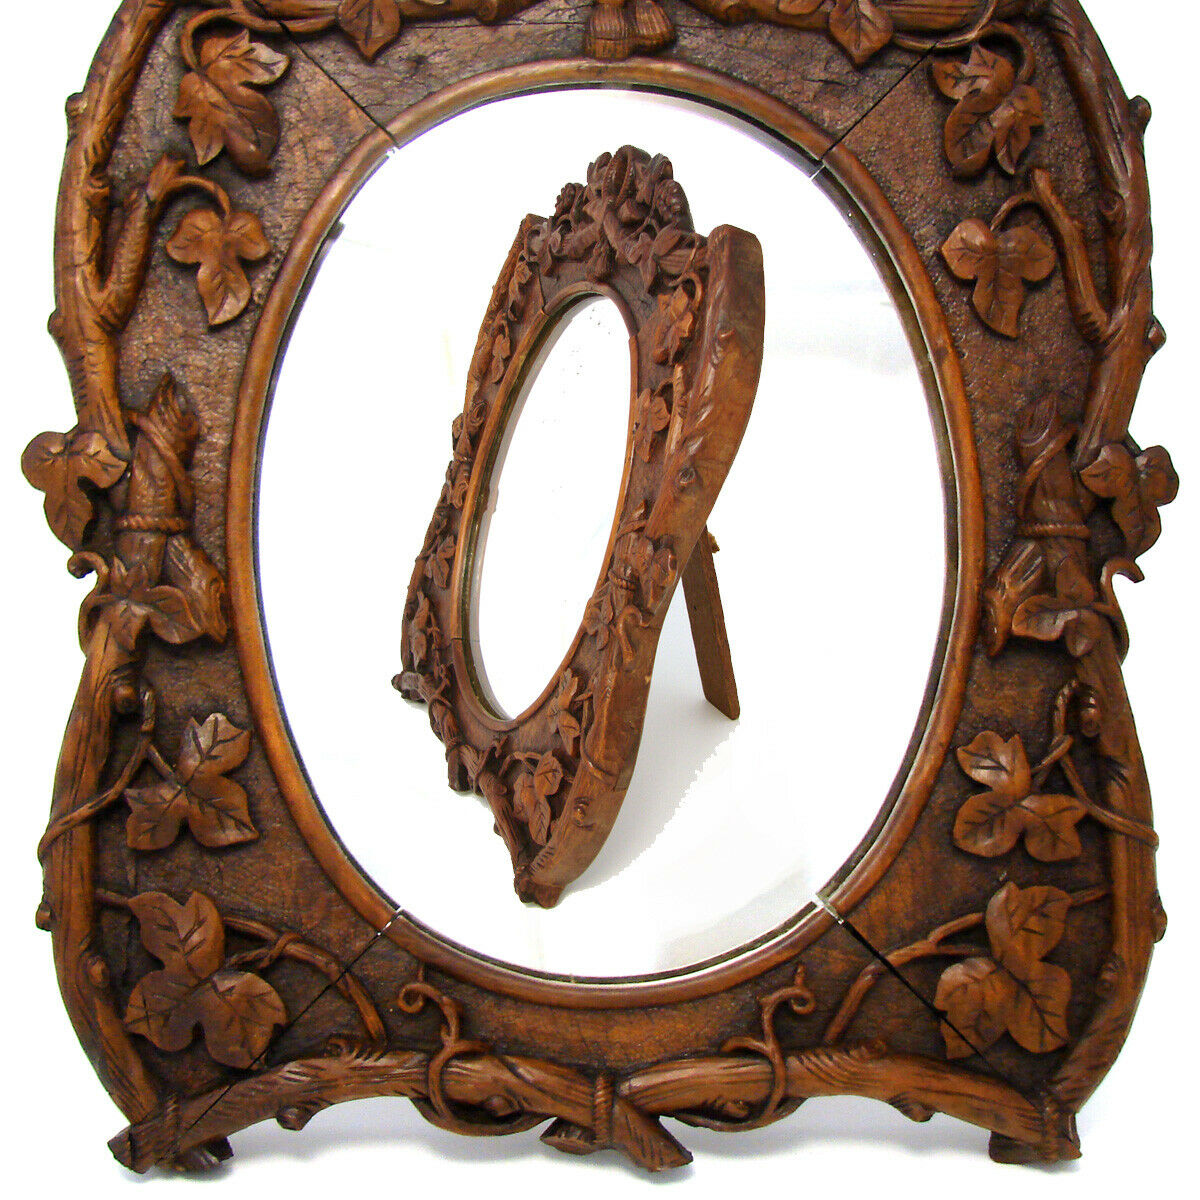 Antique Black Forest Style 12” Vanity or Boudoir Mirror, Ornate Foliage, Signed